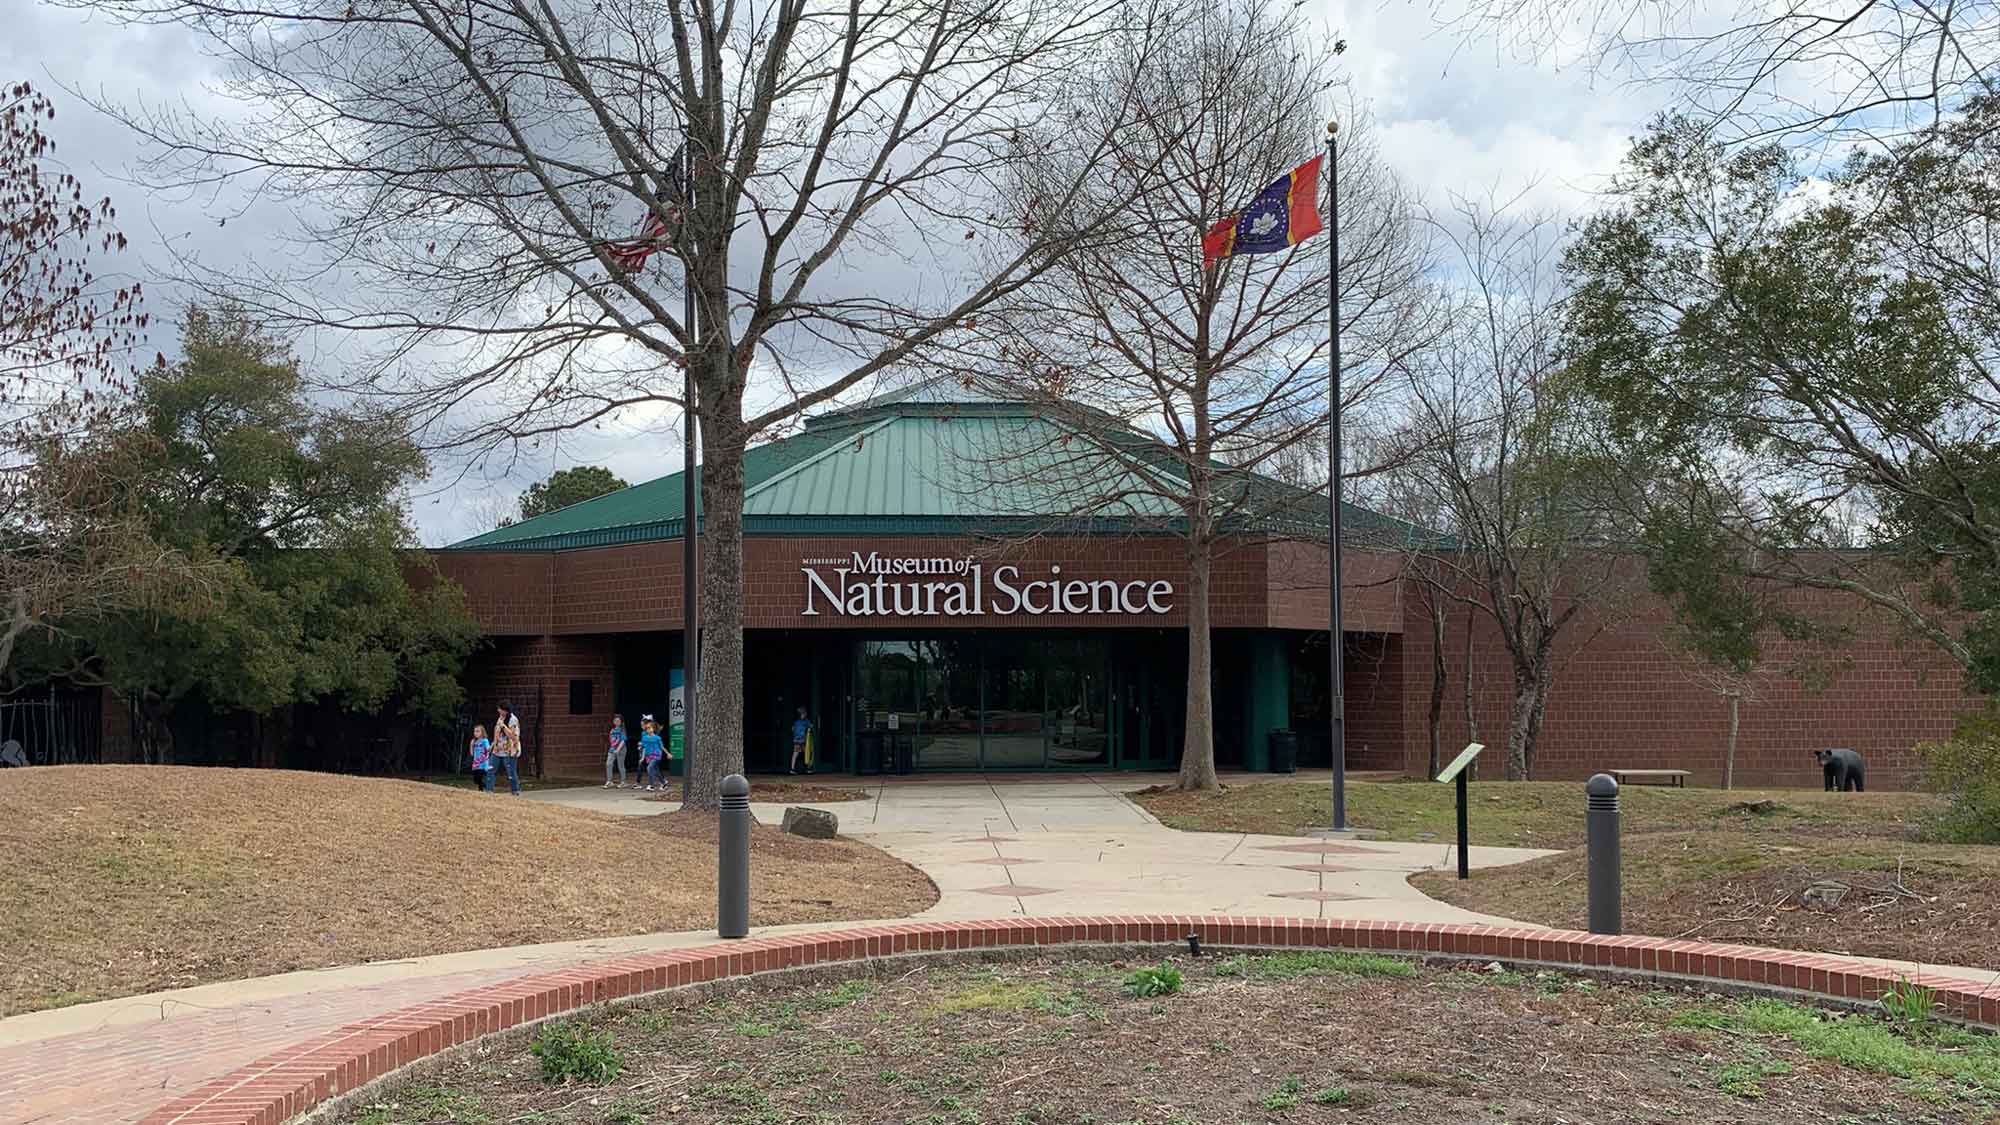 Photograph of the exterior of the Mississippi Museum of Natural History.